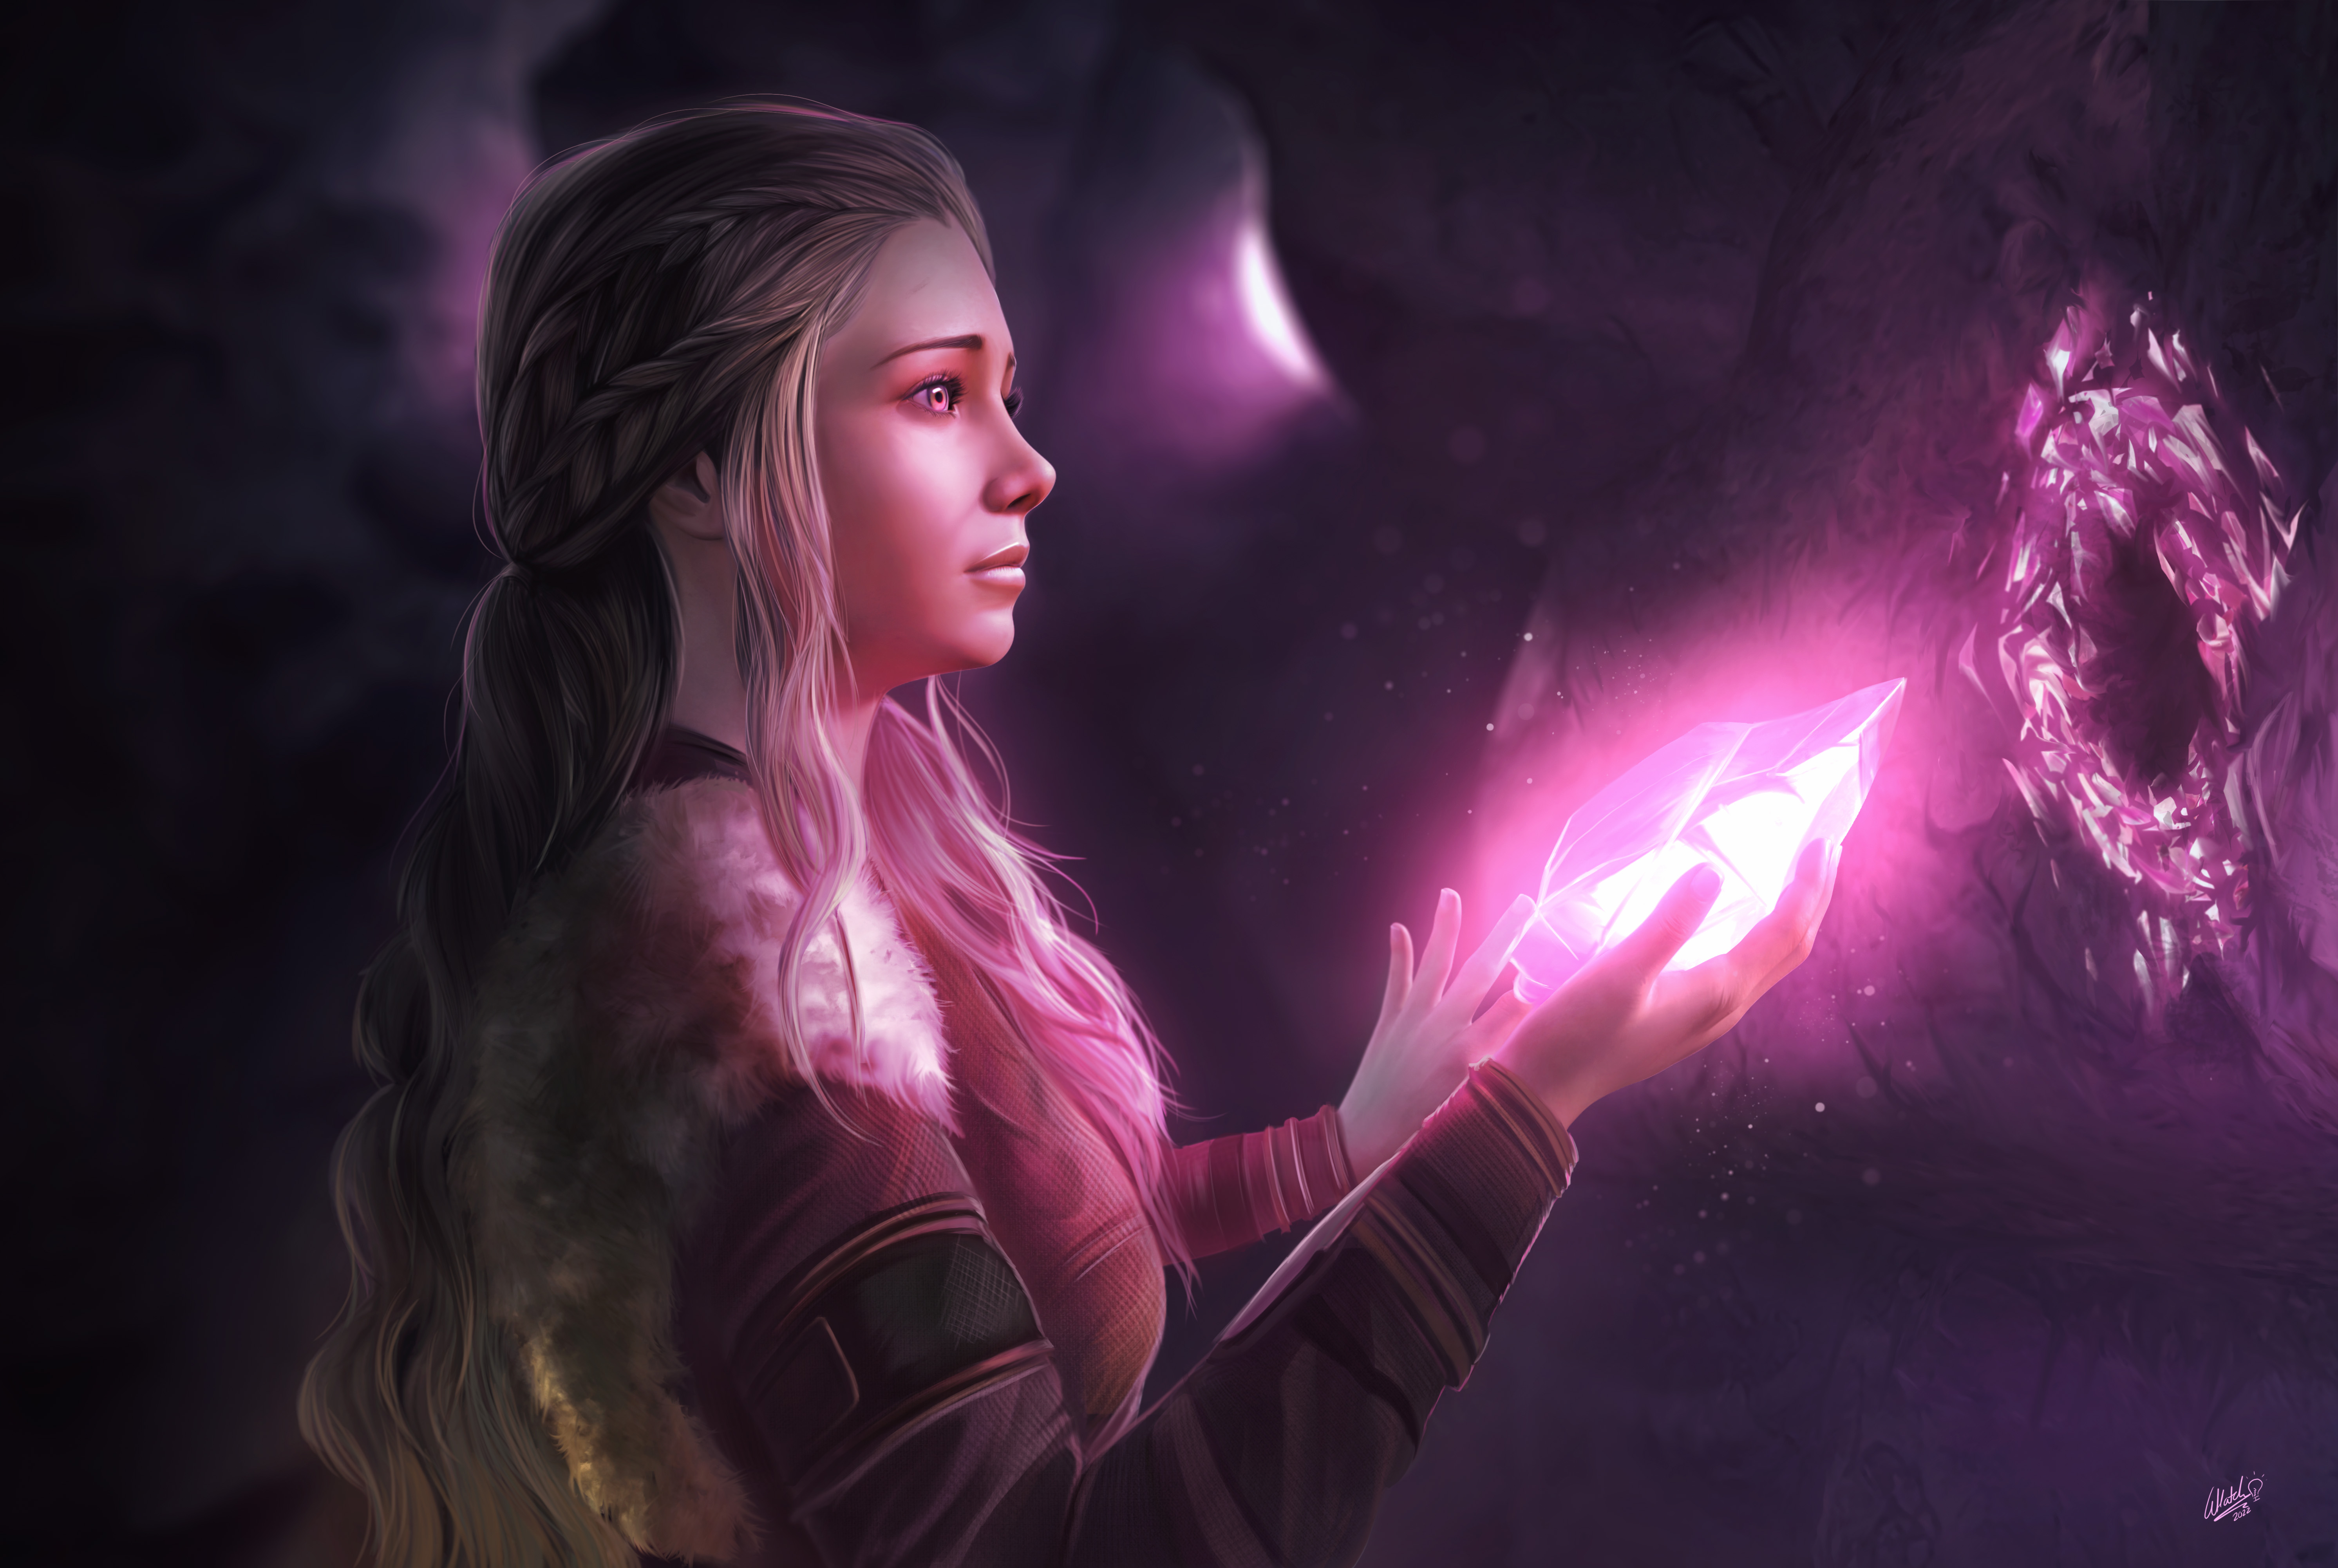 Cliodhna, a blonde girl, is in a dark cave, holding a glowing pink crystal in her palm. There is a hole in the cave wall where she pulled it from. Other crystals glow in the walls behind her.